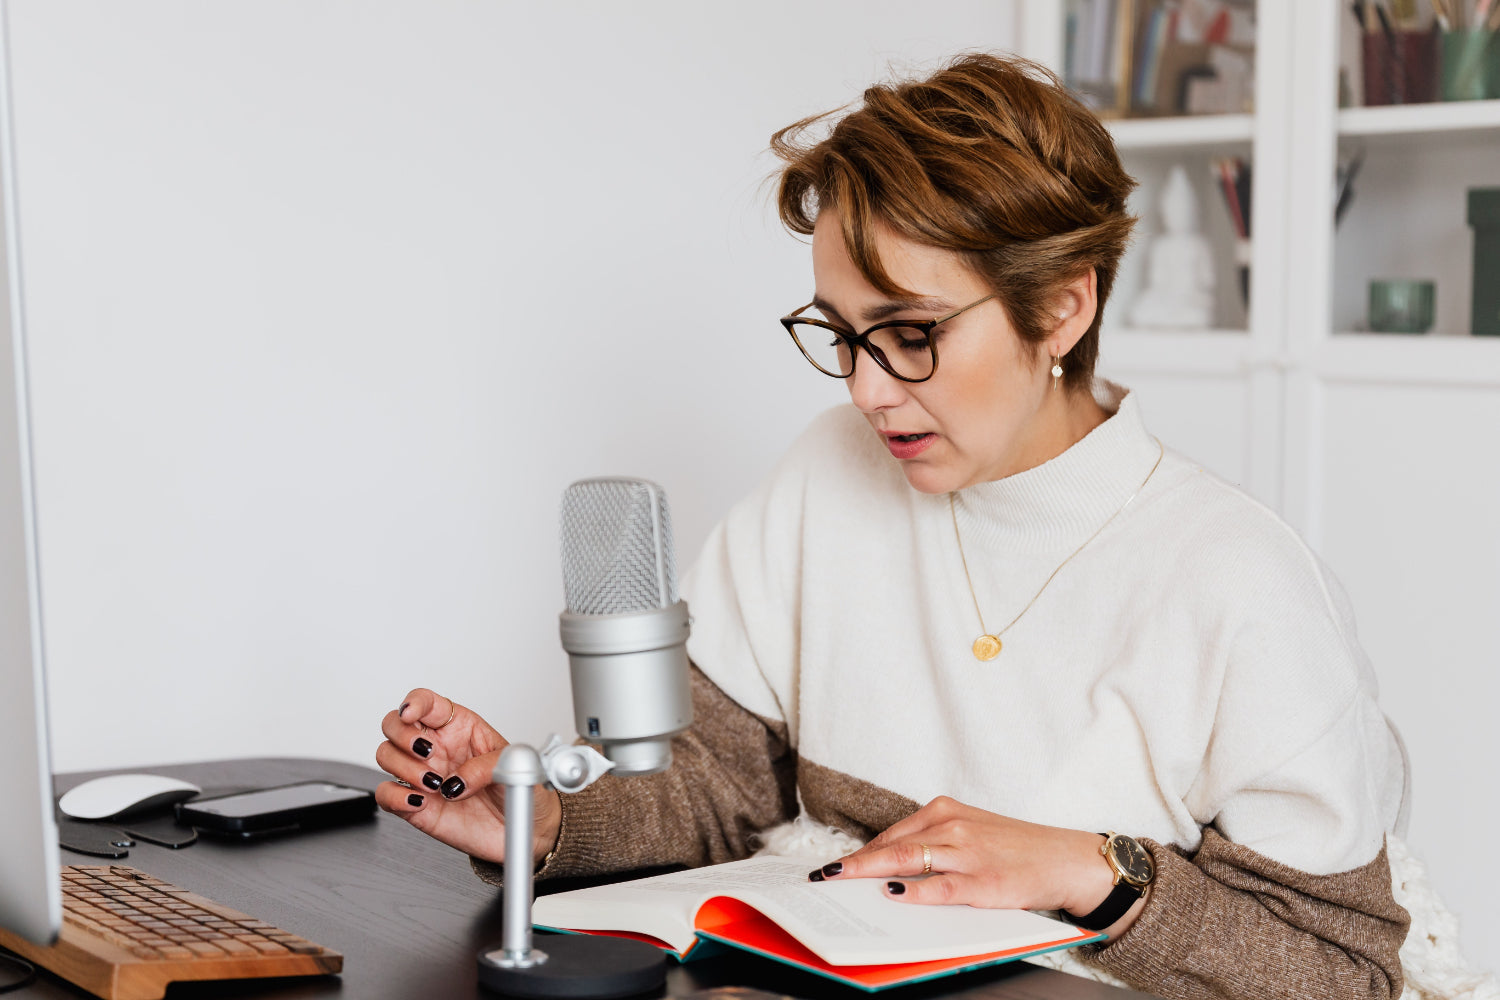 A woman makes money at home narrating a book using a professional microphone